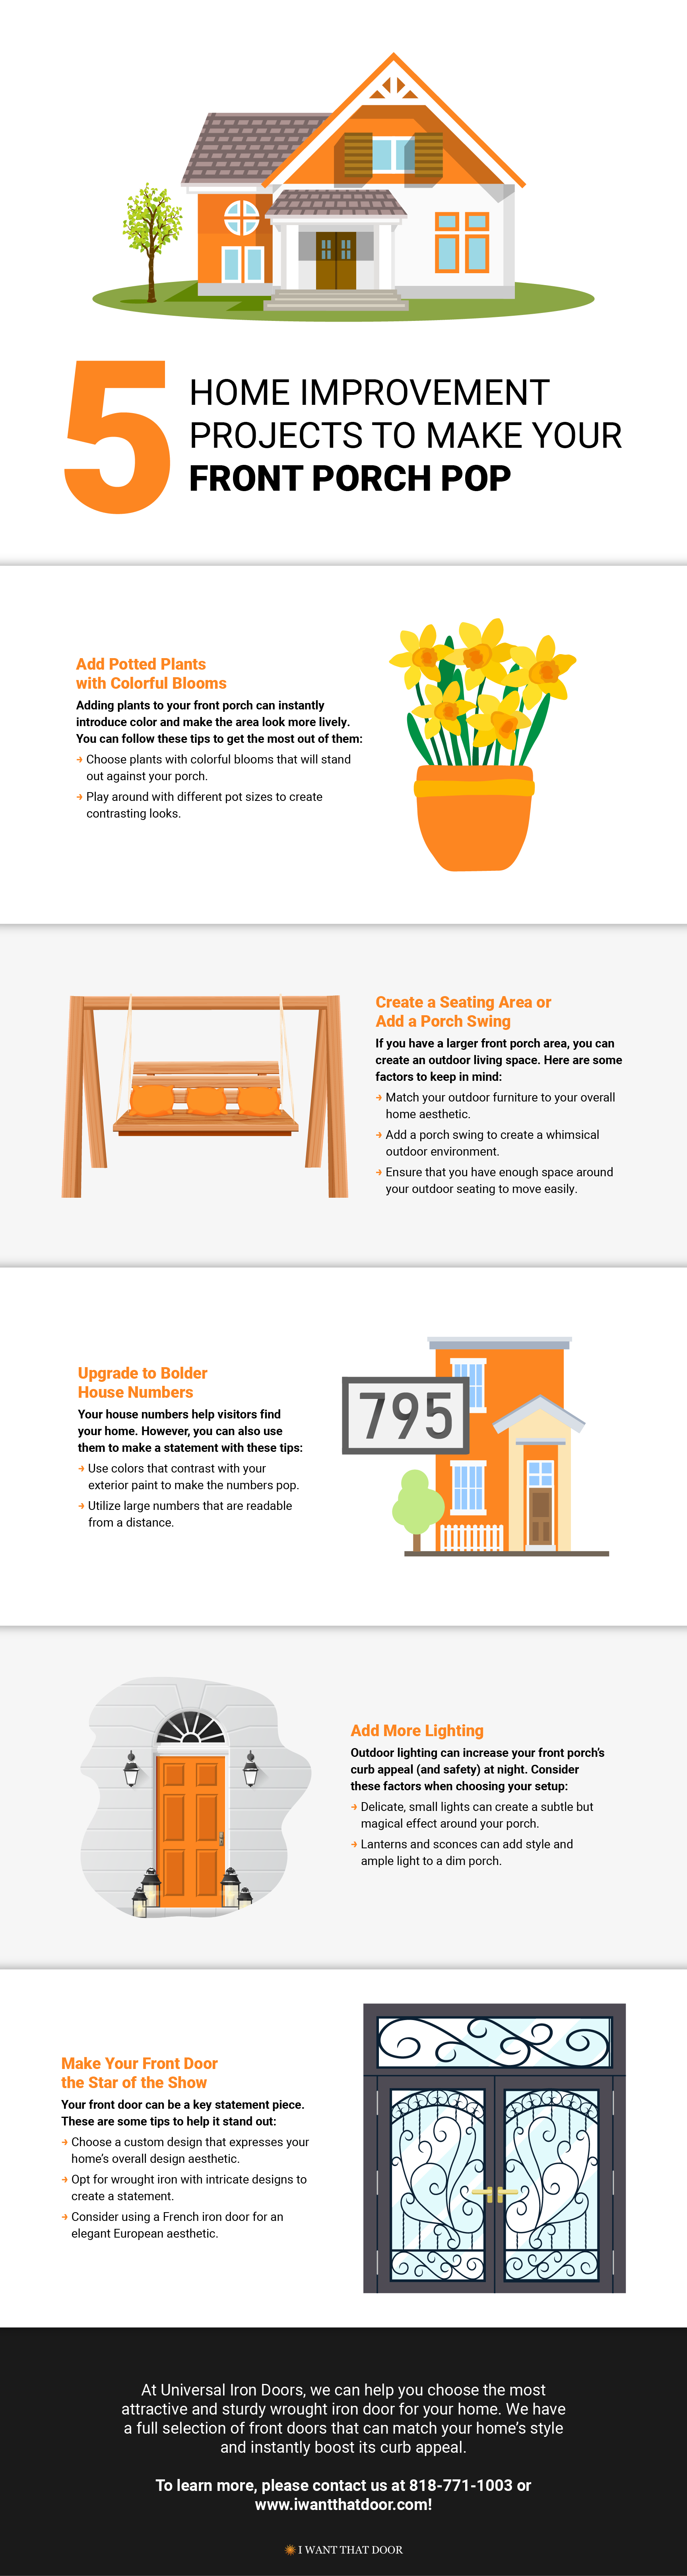 Front Porch Pop Home Improvement Projects Infographic